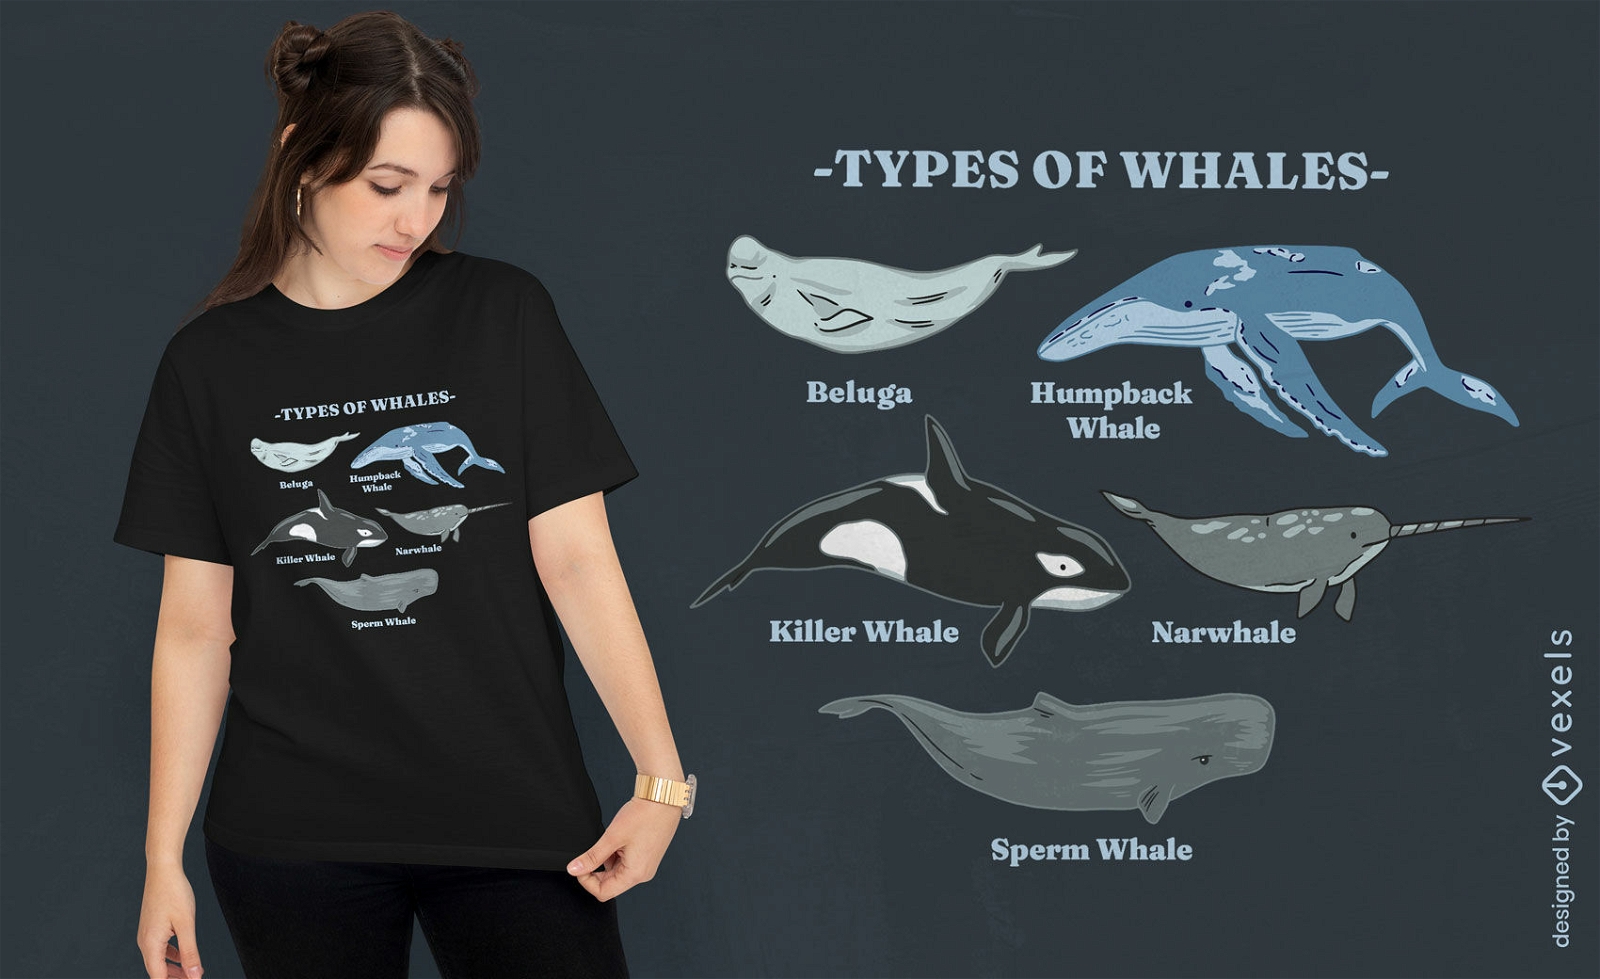 Types of whales t-shirt design